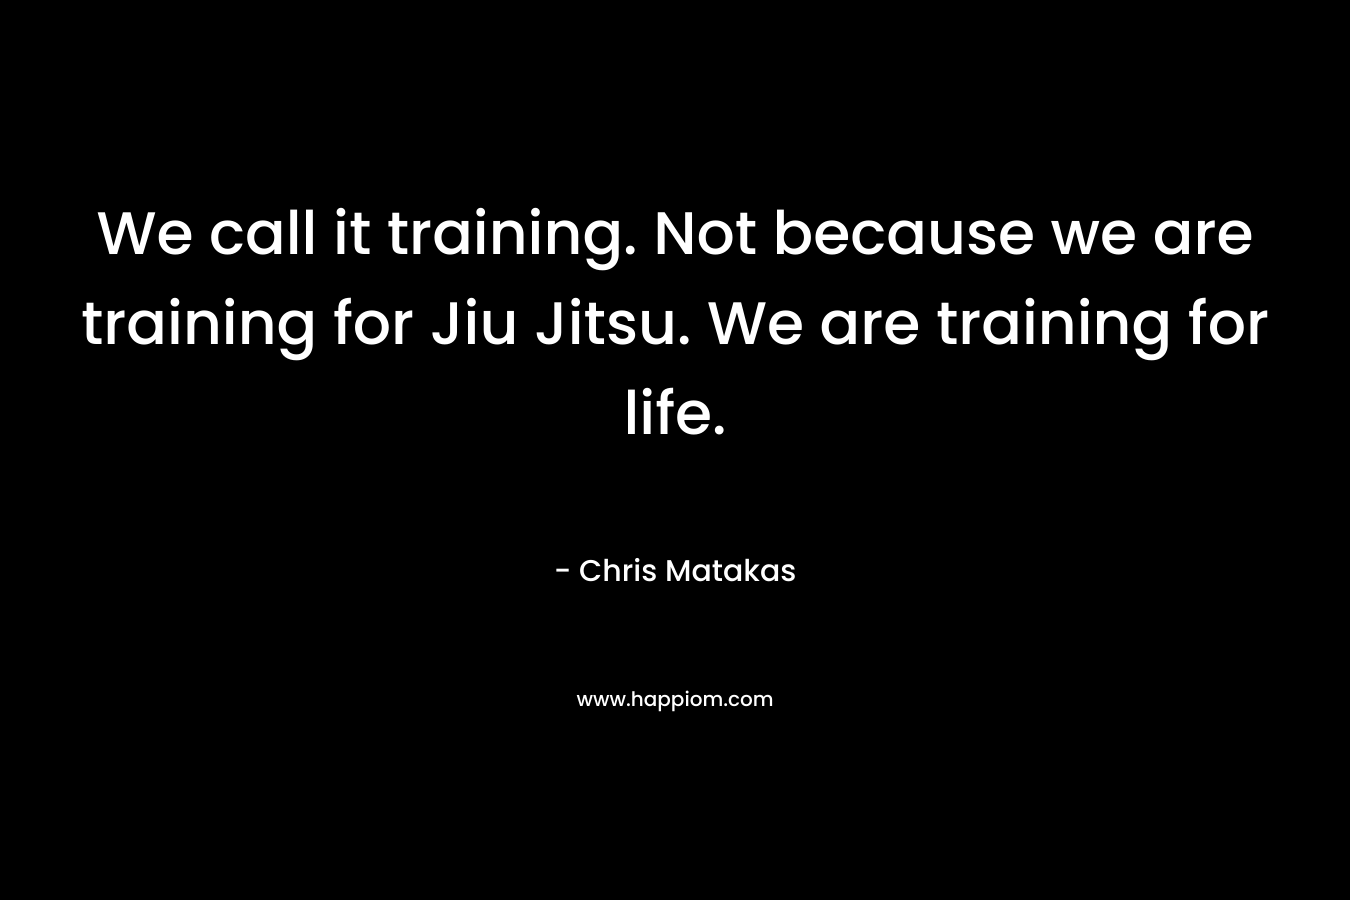 We call it training. Not because we are training for Jiu Jitsu. We are training for life.